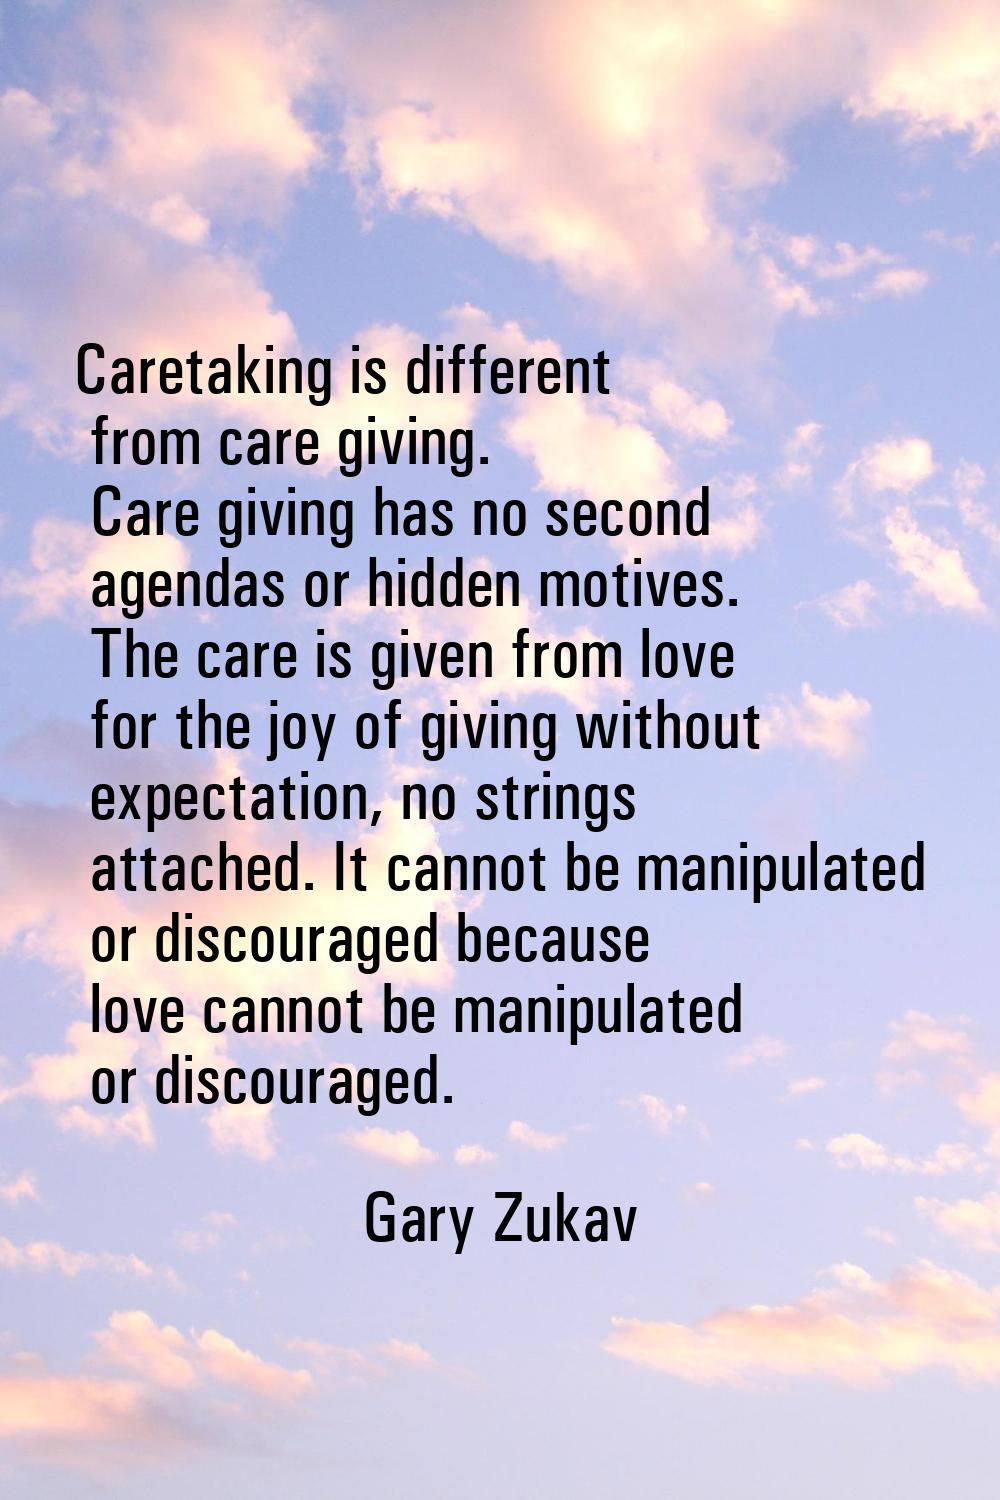 Caretaking is different from care giving. Care giving has no second agendas or hidden motives. The 